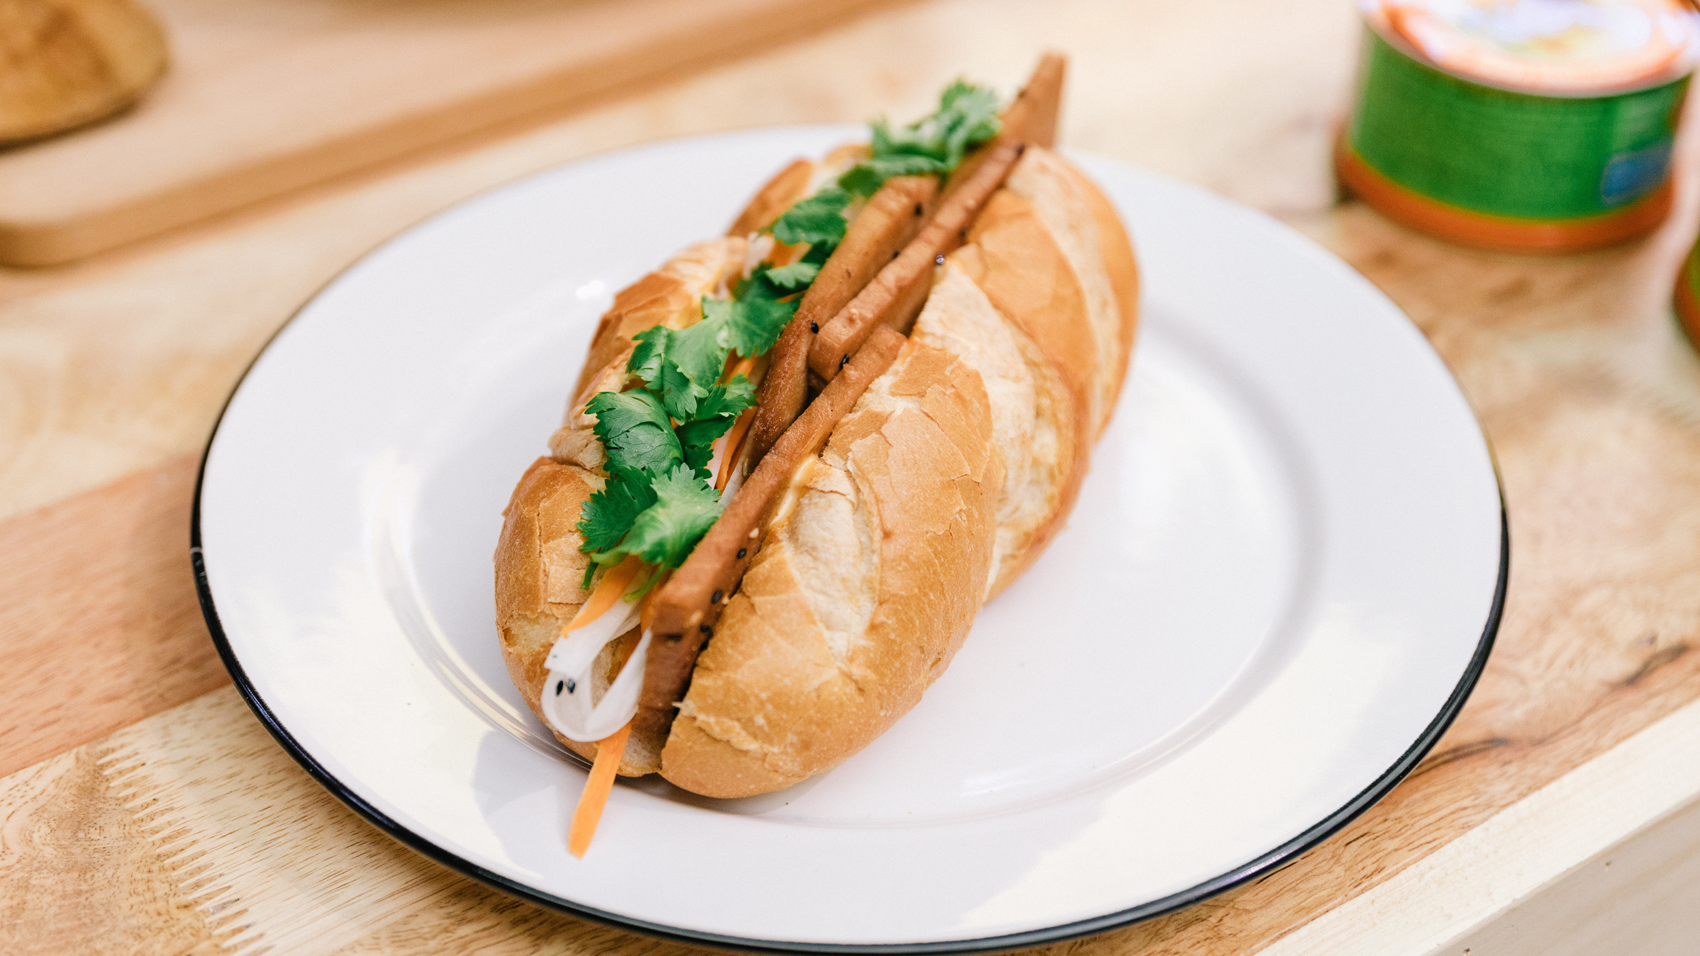 Plant-Based Luncheon Bahn Mi (by Chef Anis)